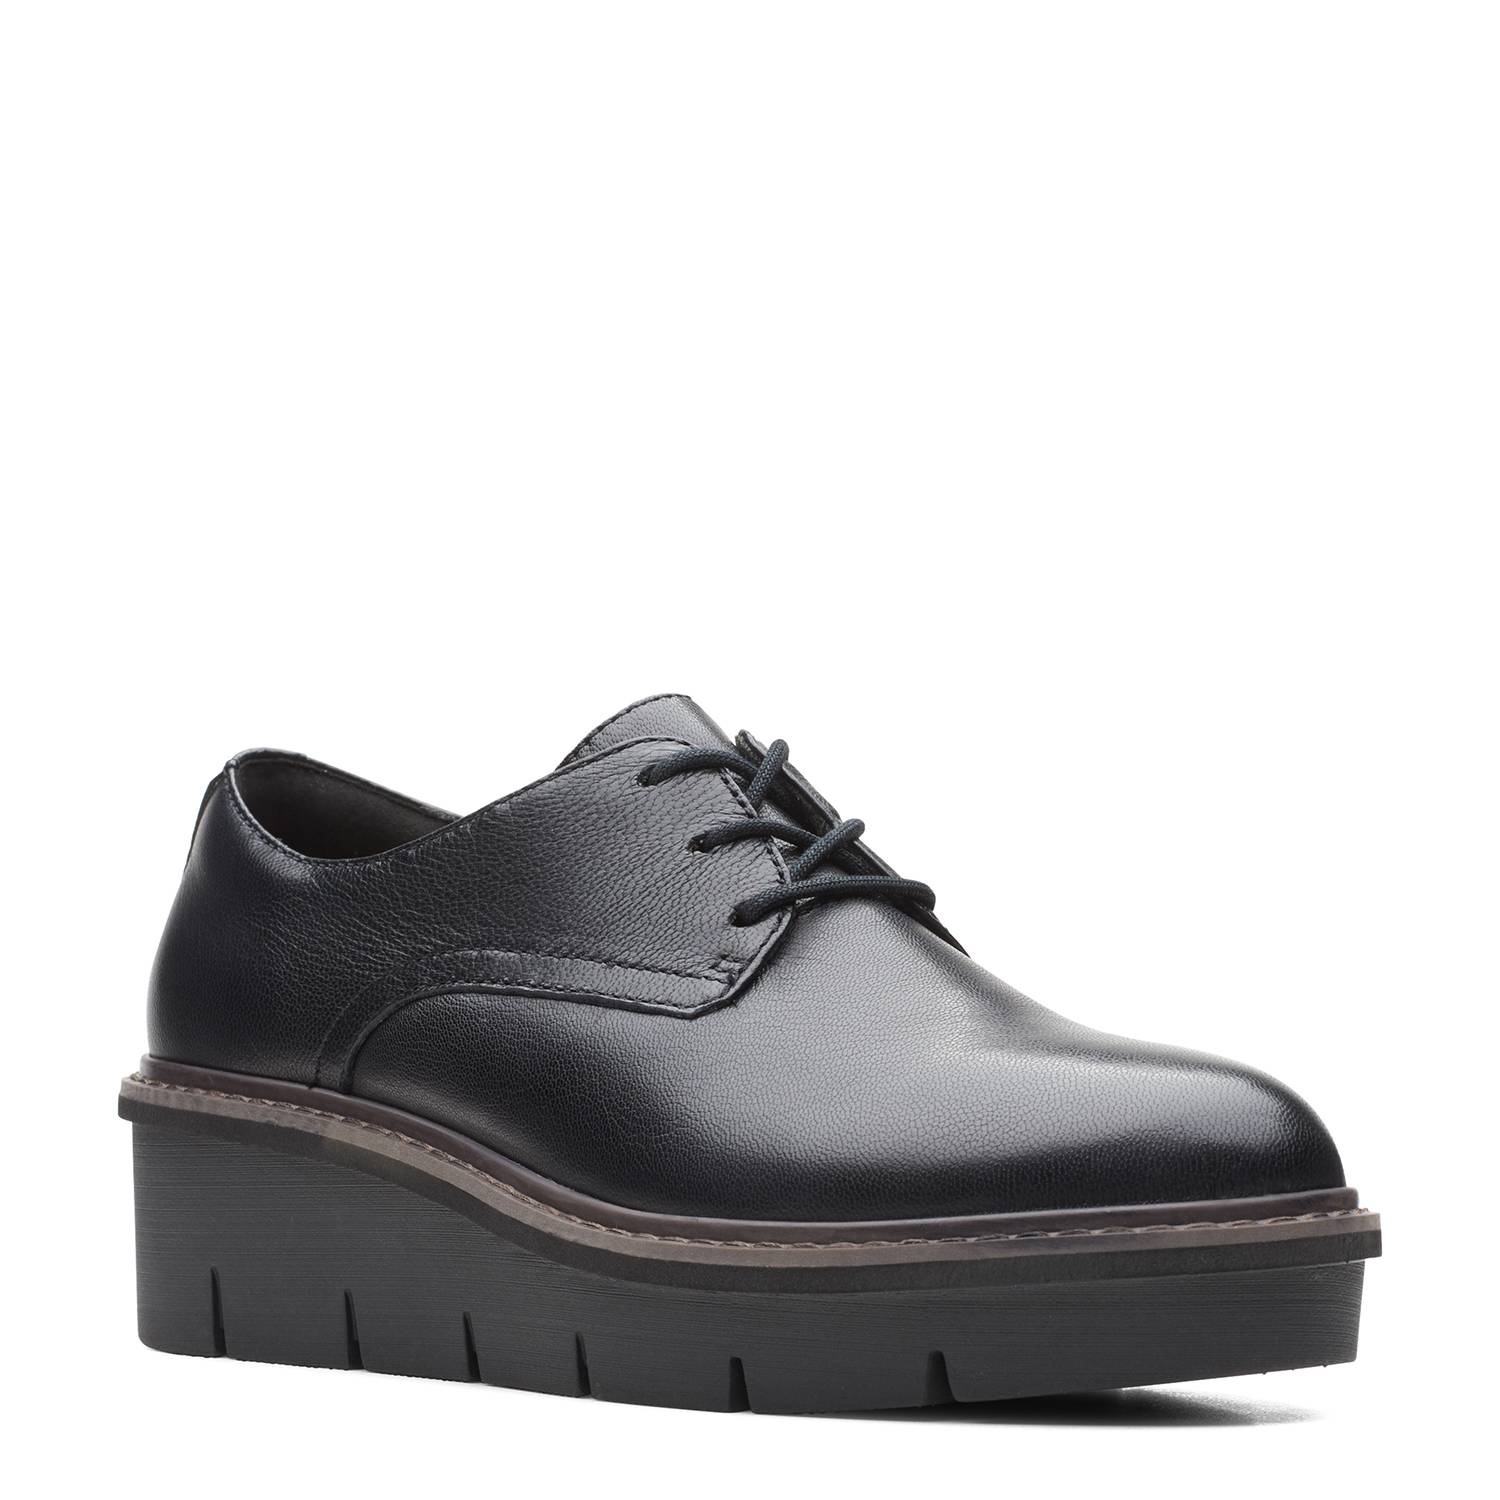 Zapatos casuales Mujer Airabell Clarks | falabella.com